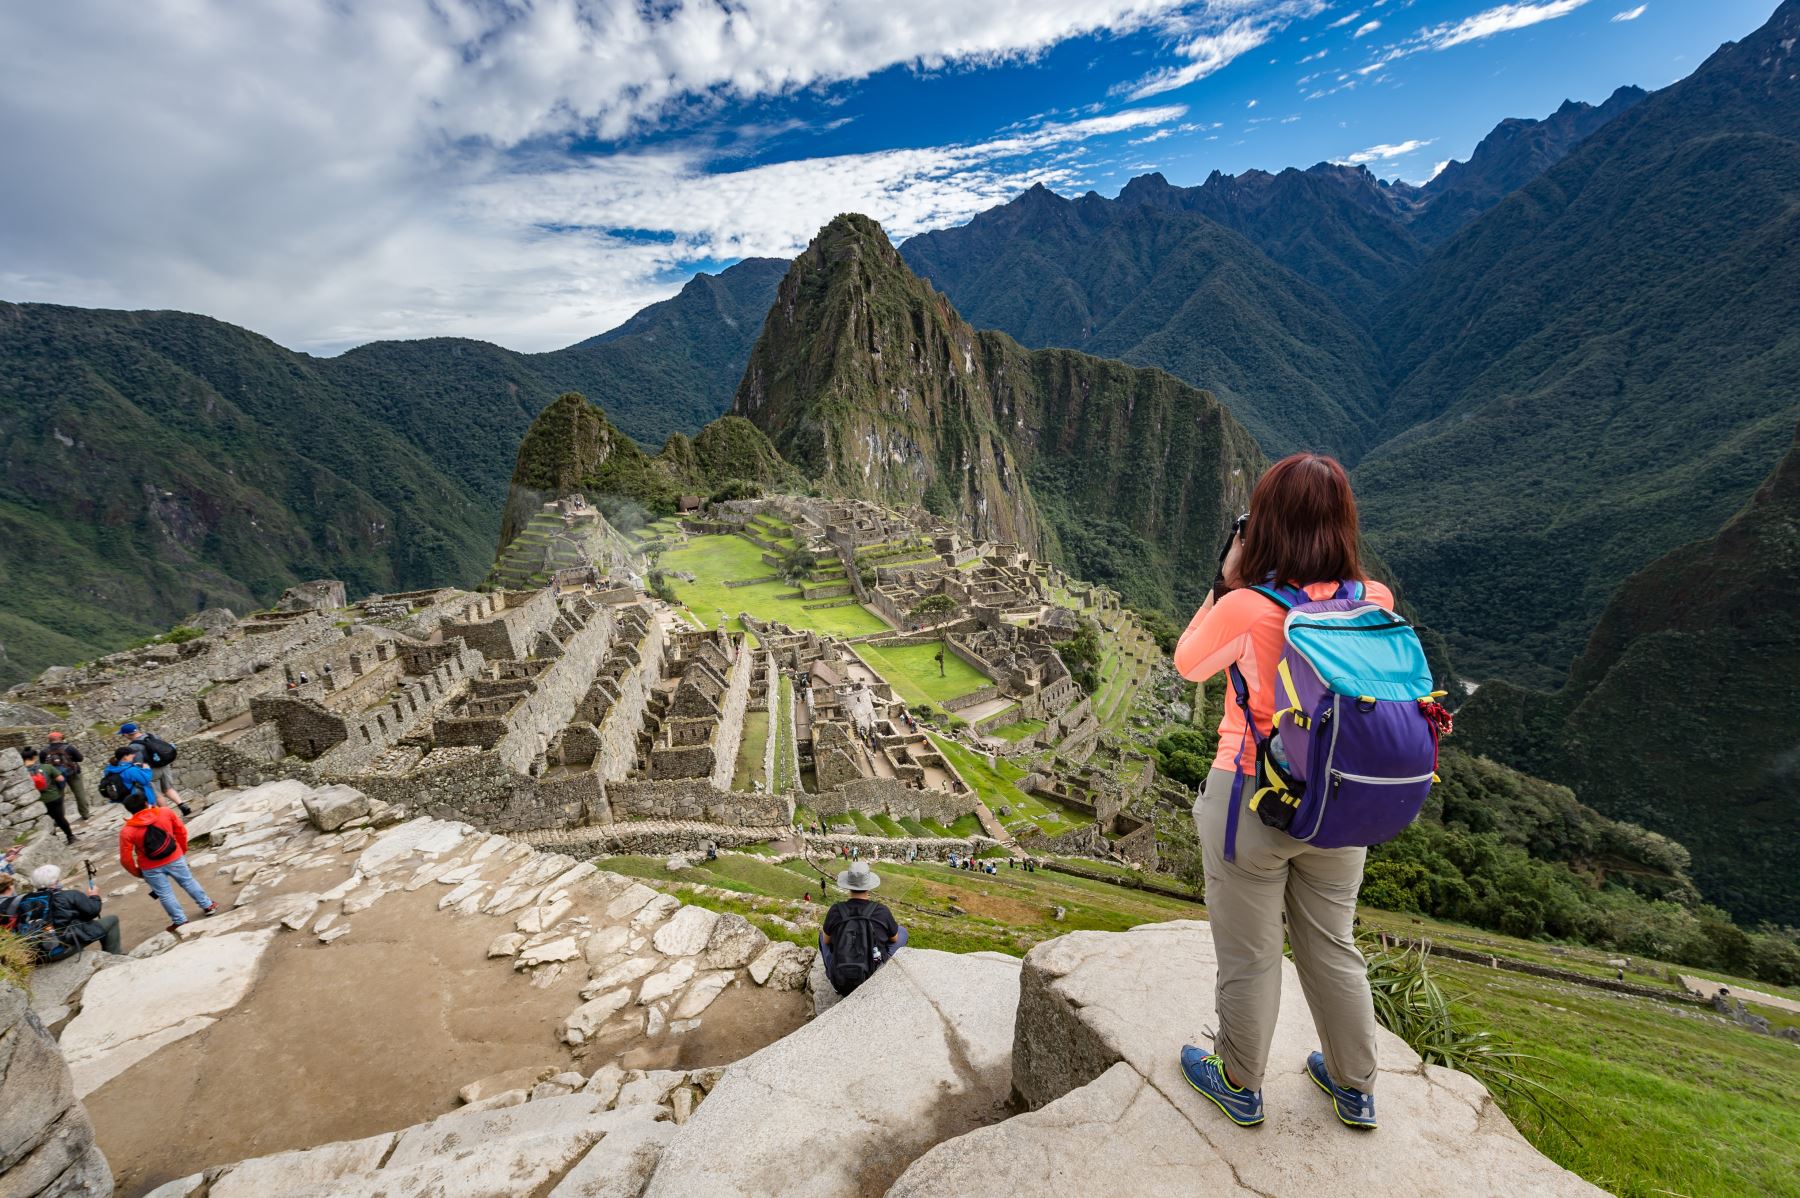 Photo: Ministry of Foreign Trade and Tourism (Mincetur) of Peru